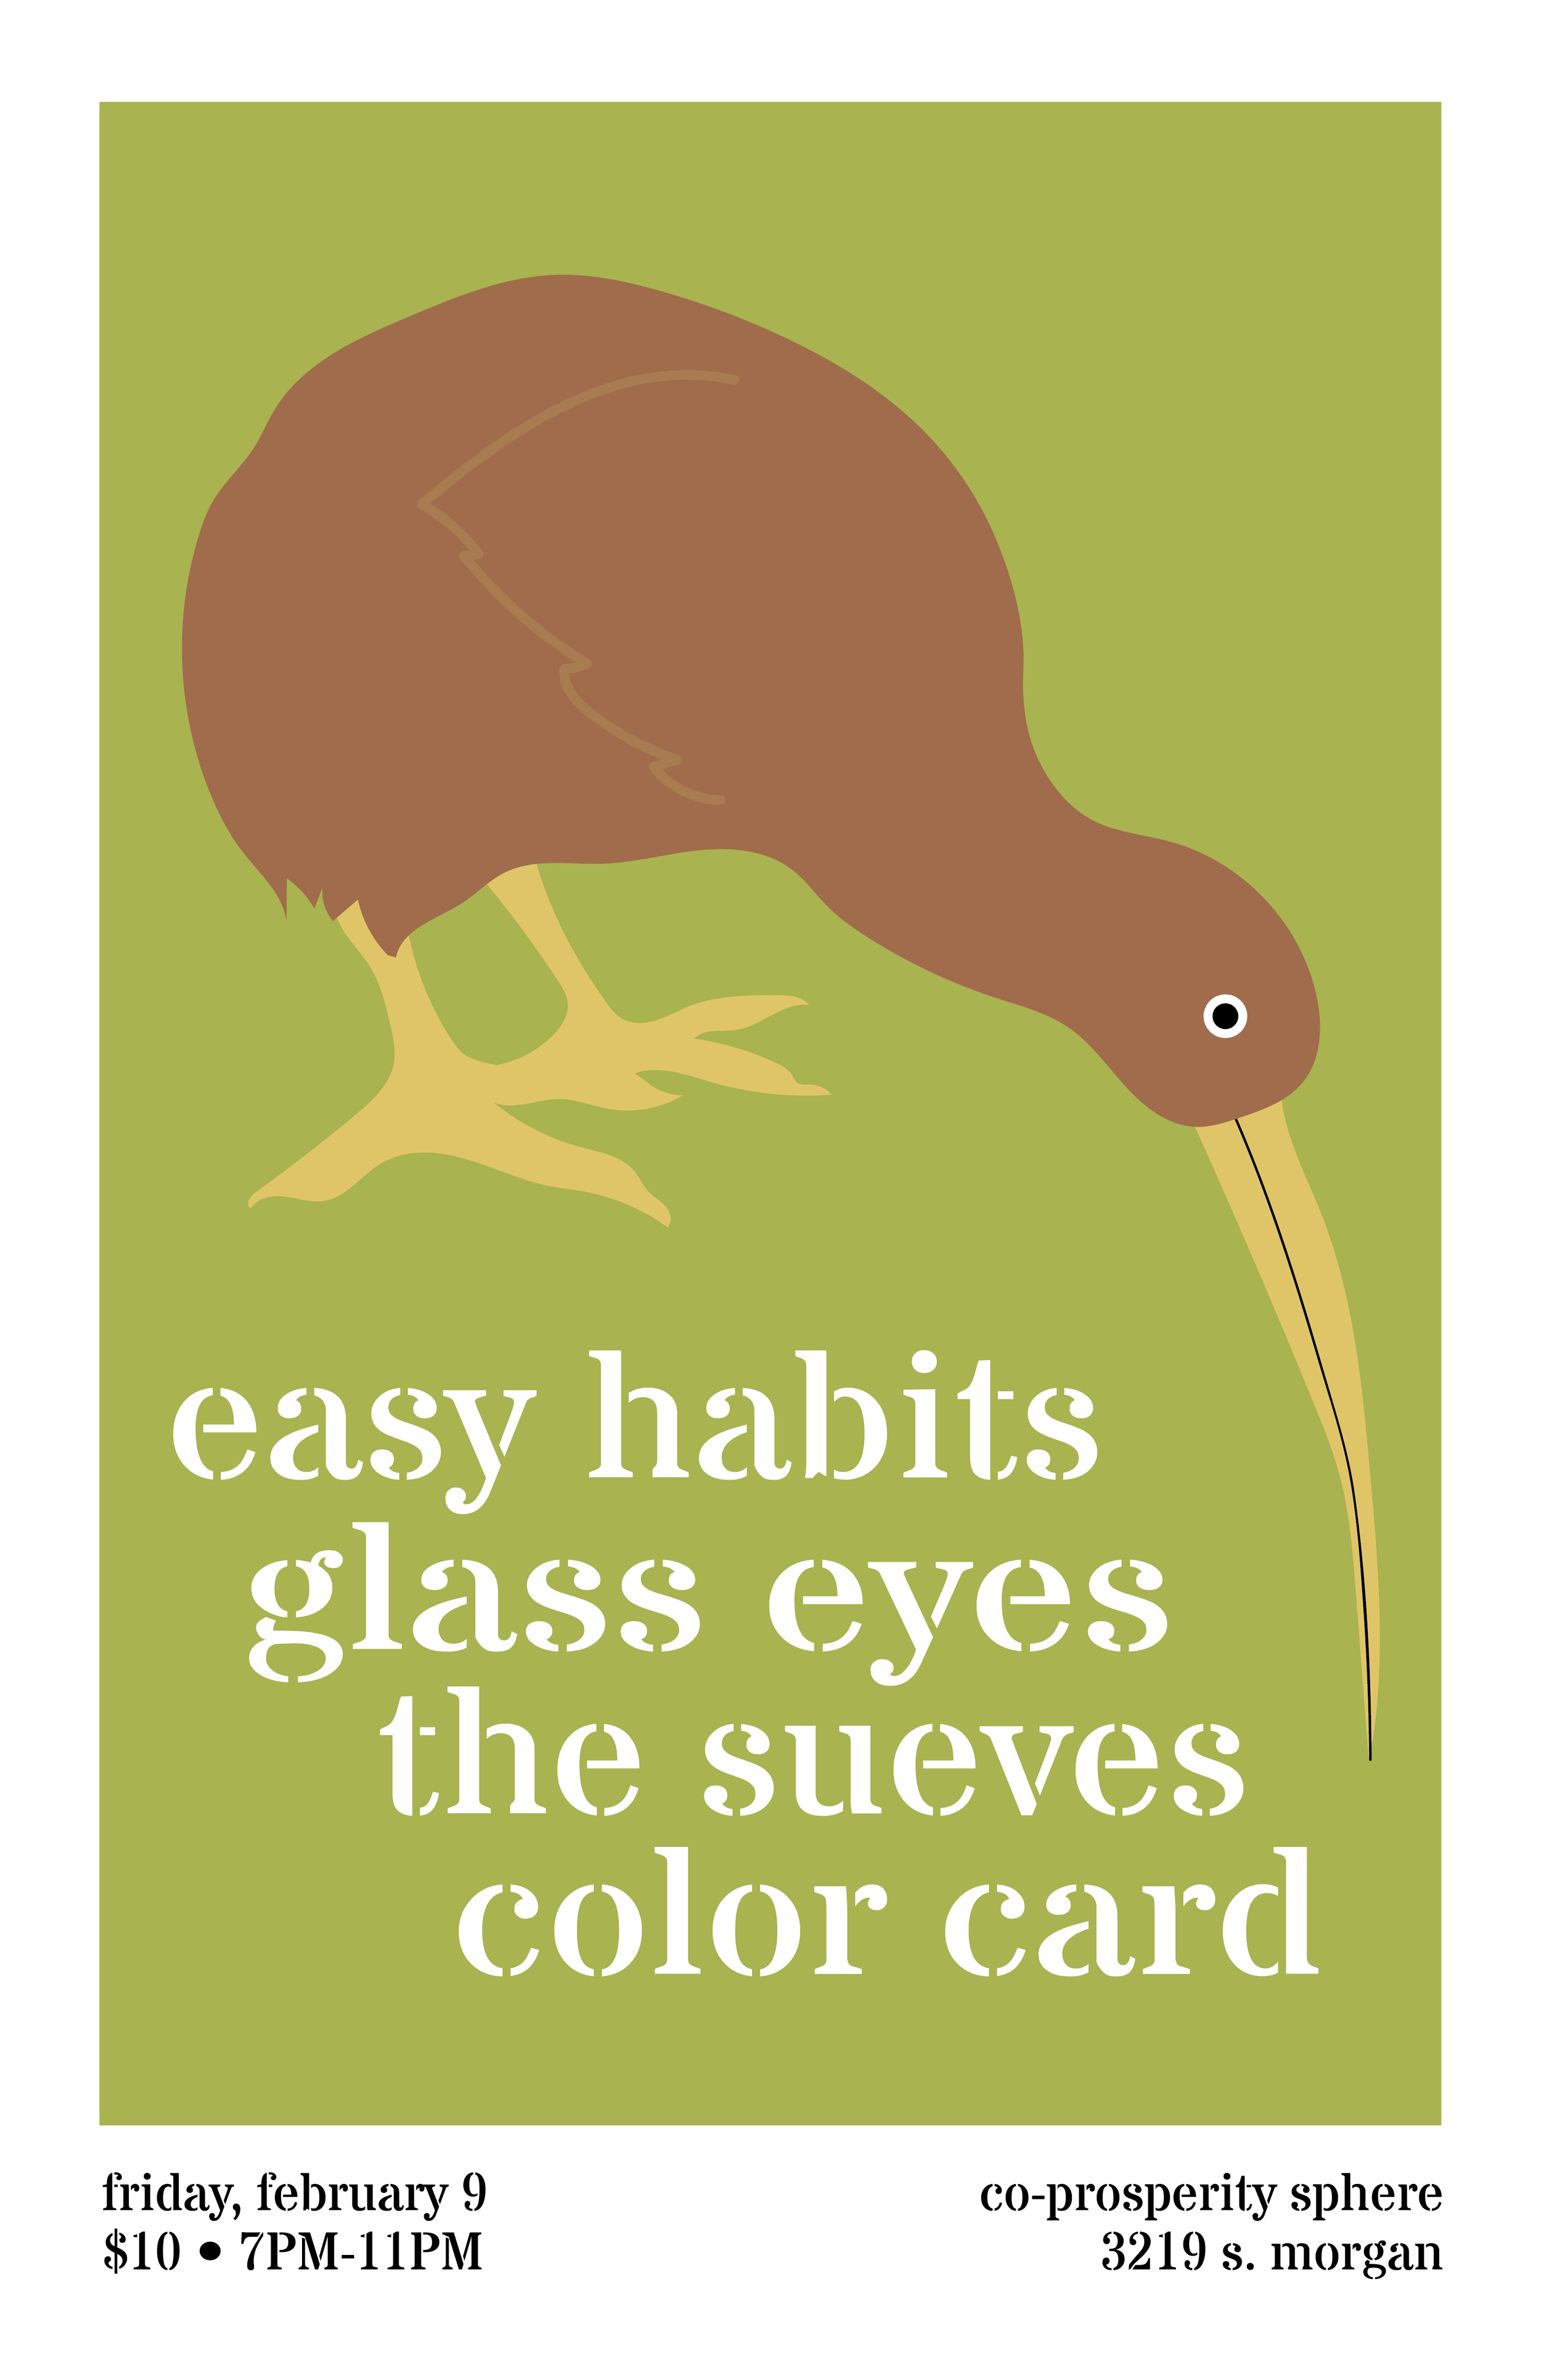  easy habits, the glass eyes, the sueves, &amp; color card poster  co-prosperity sphere, 2018 